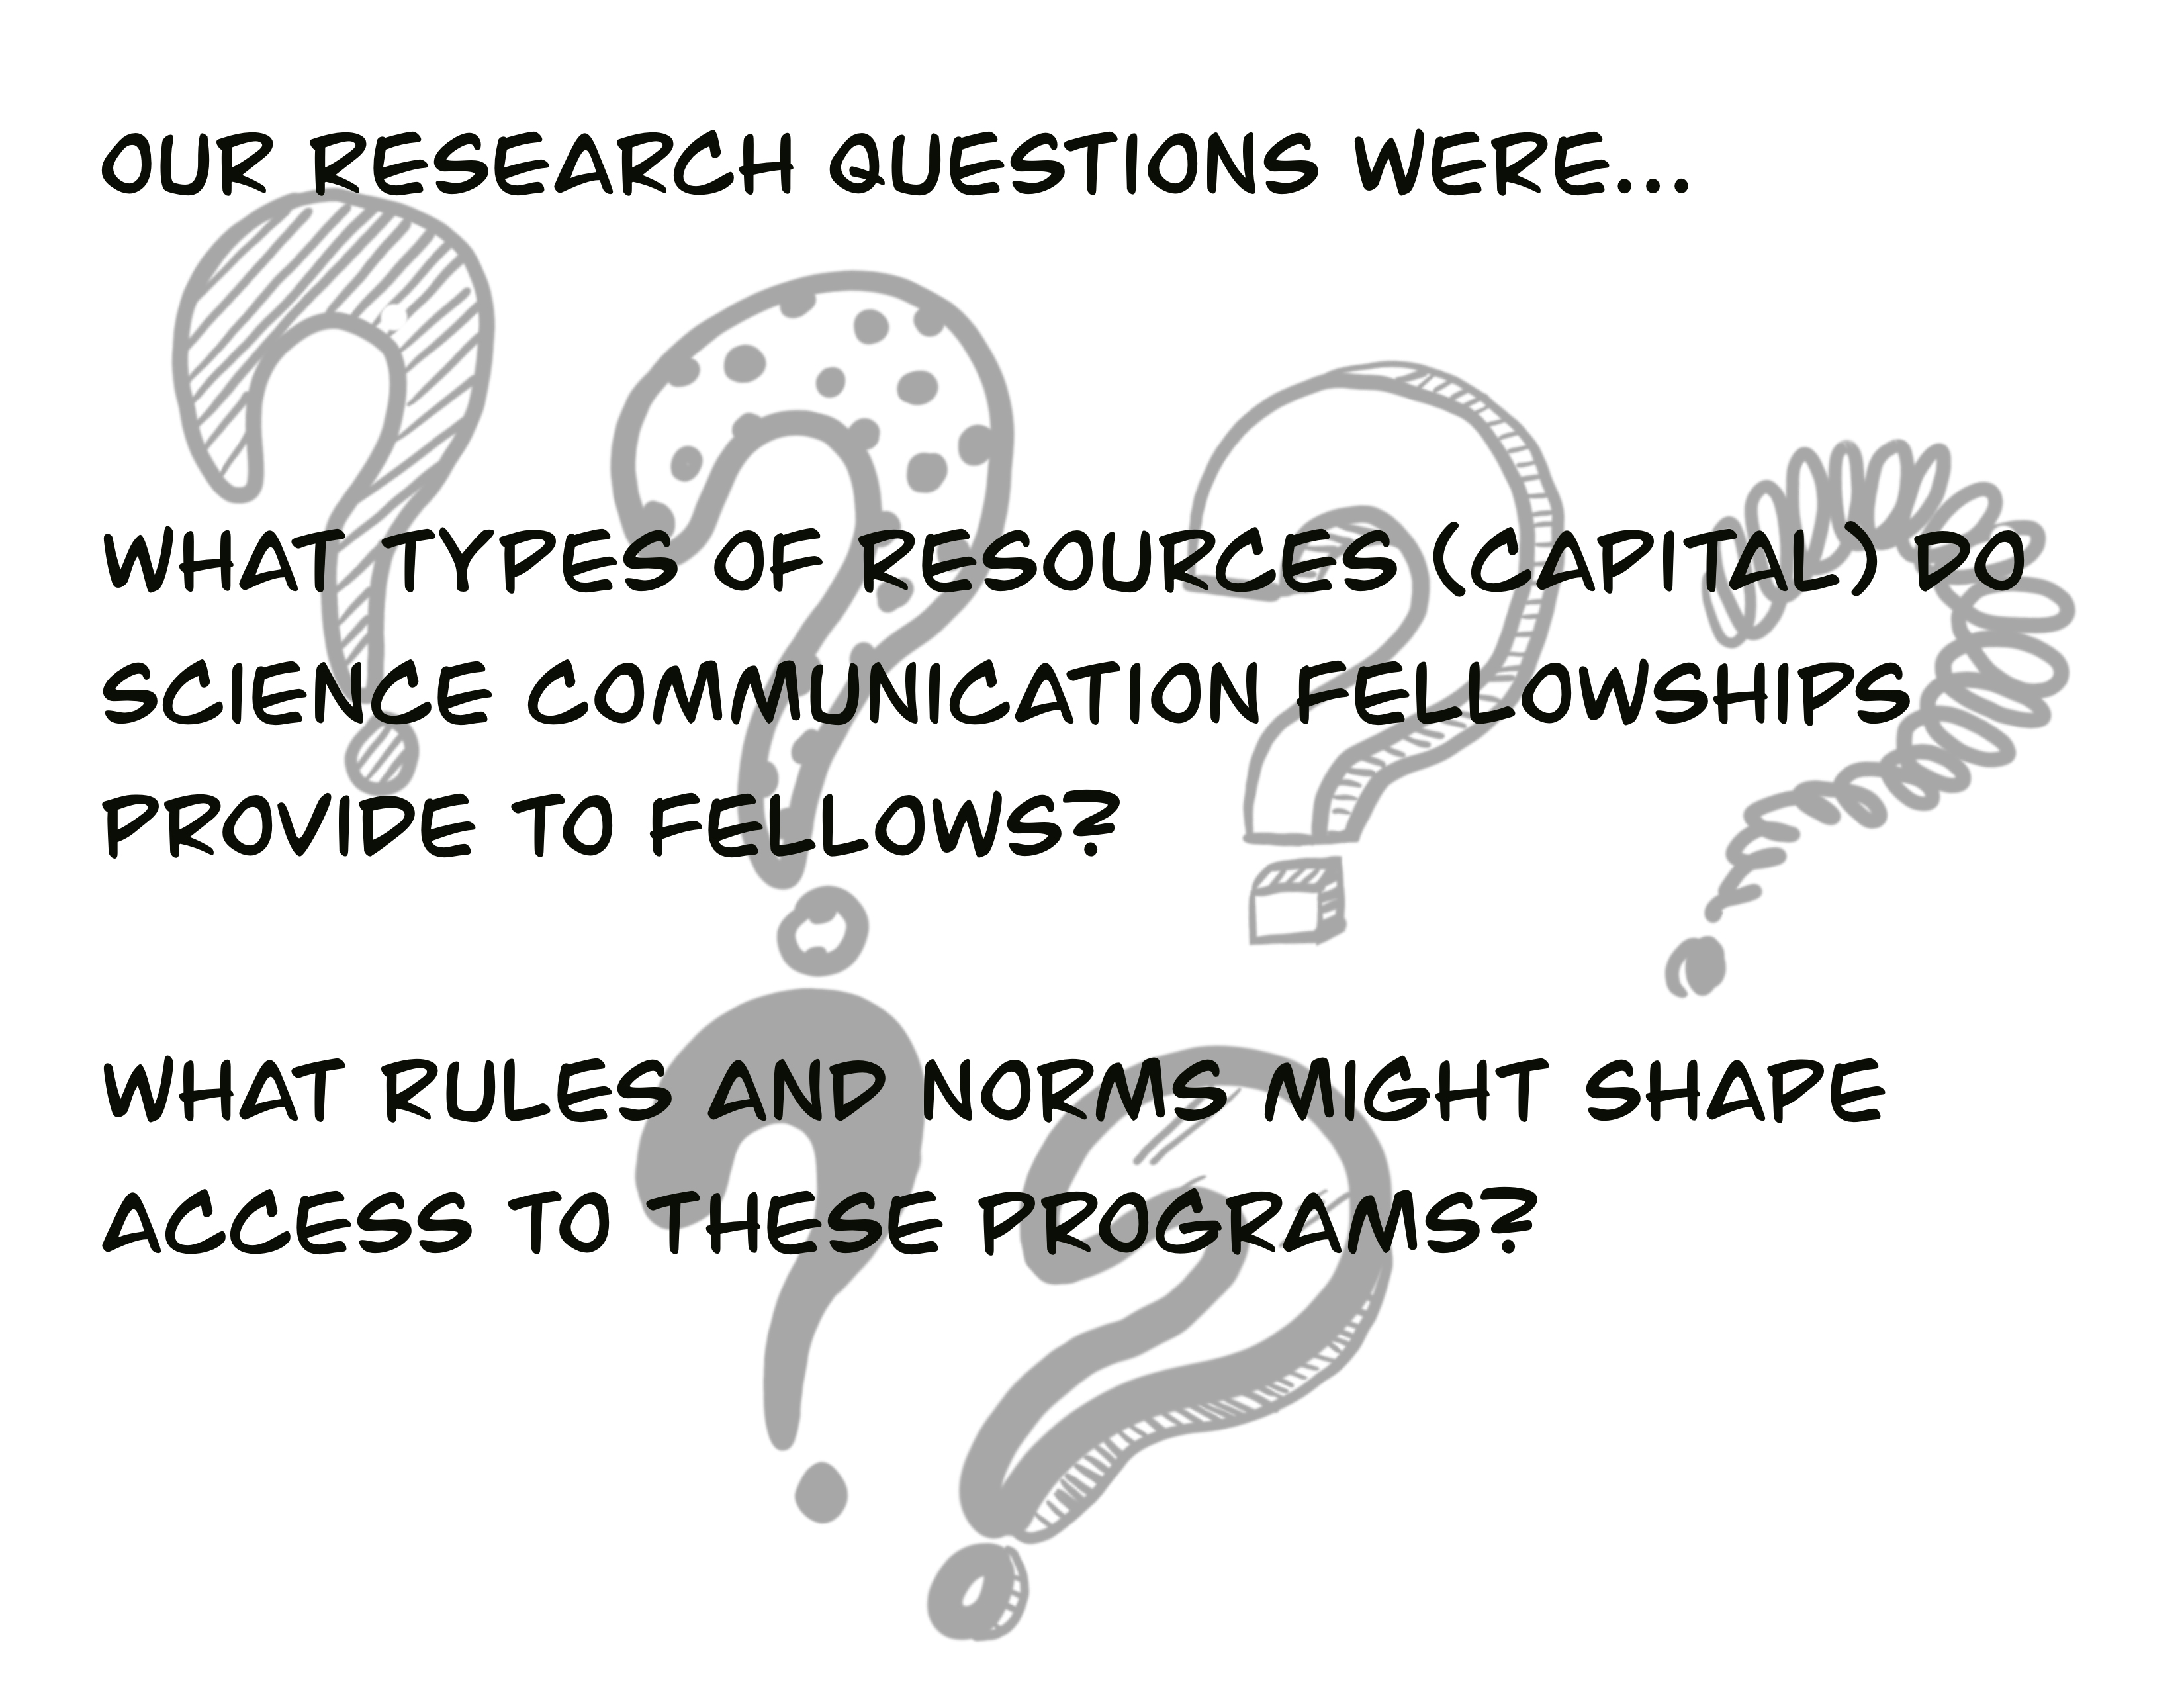 Our research questions were: What types of resources (capital) do science communication fellowships provide to fellows? What rules and norms might shape access to these programs?